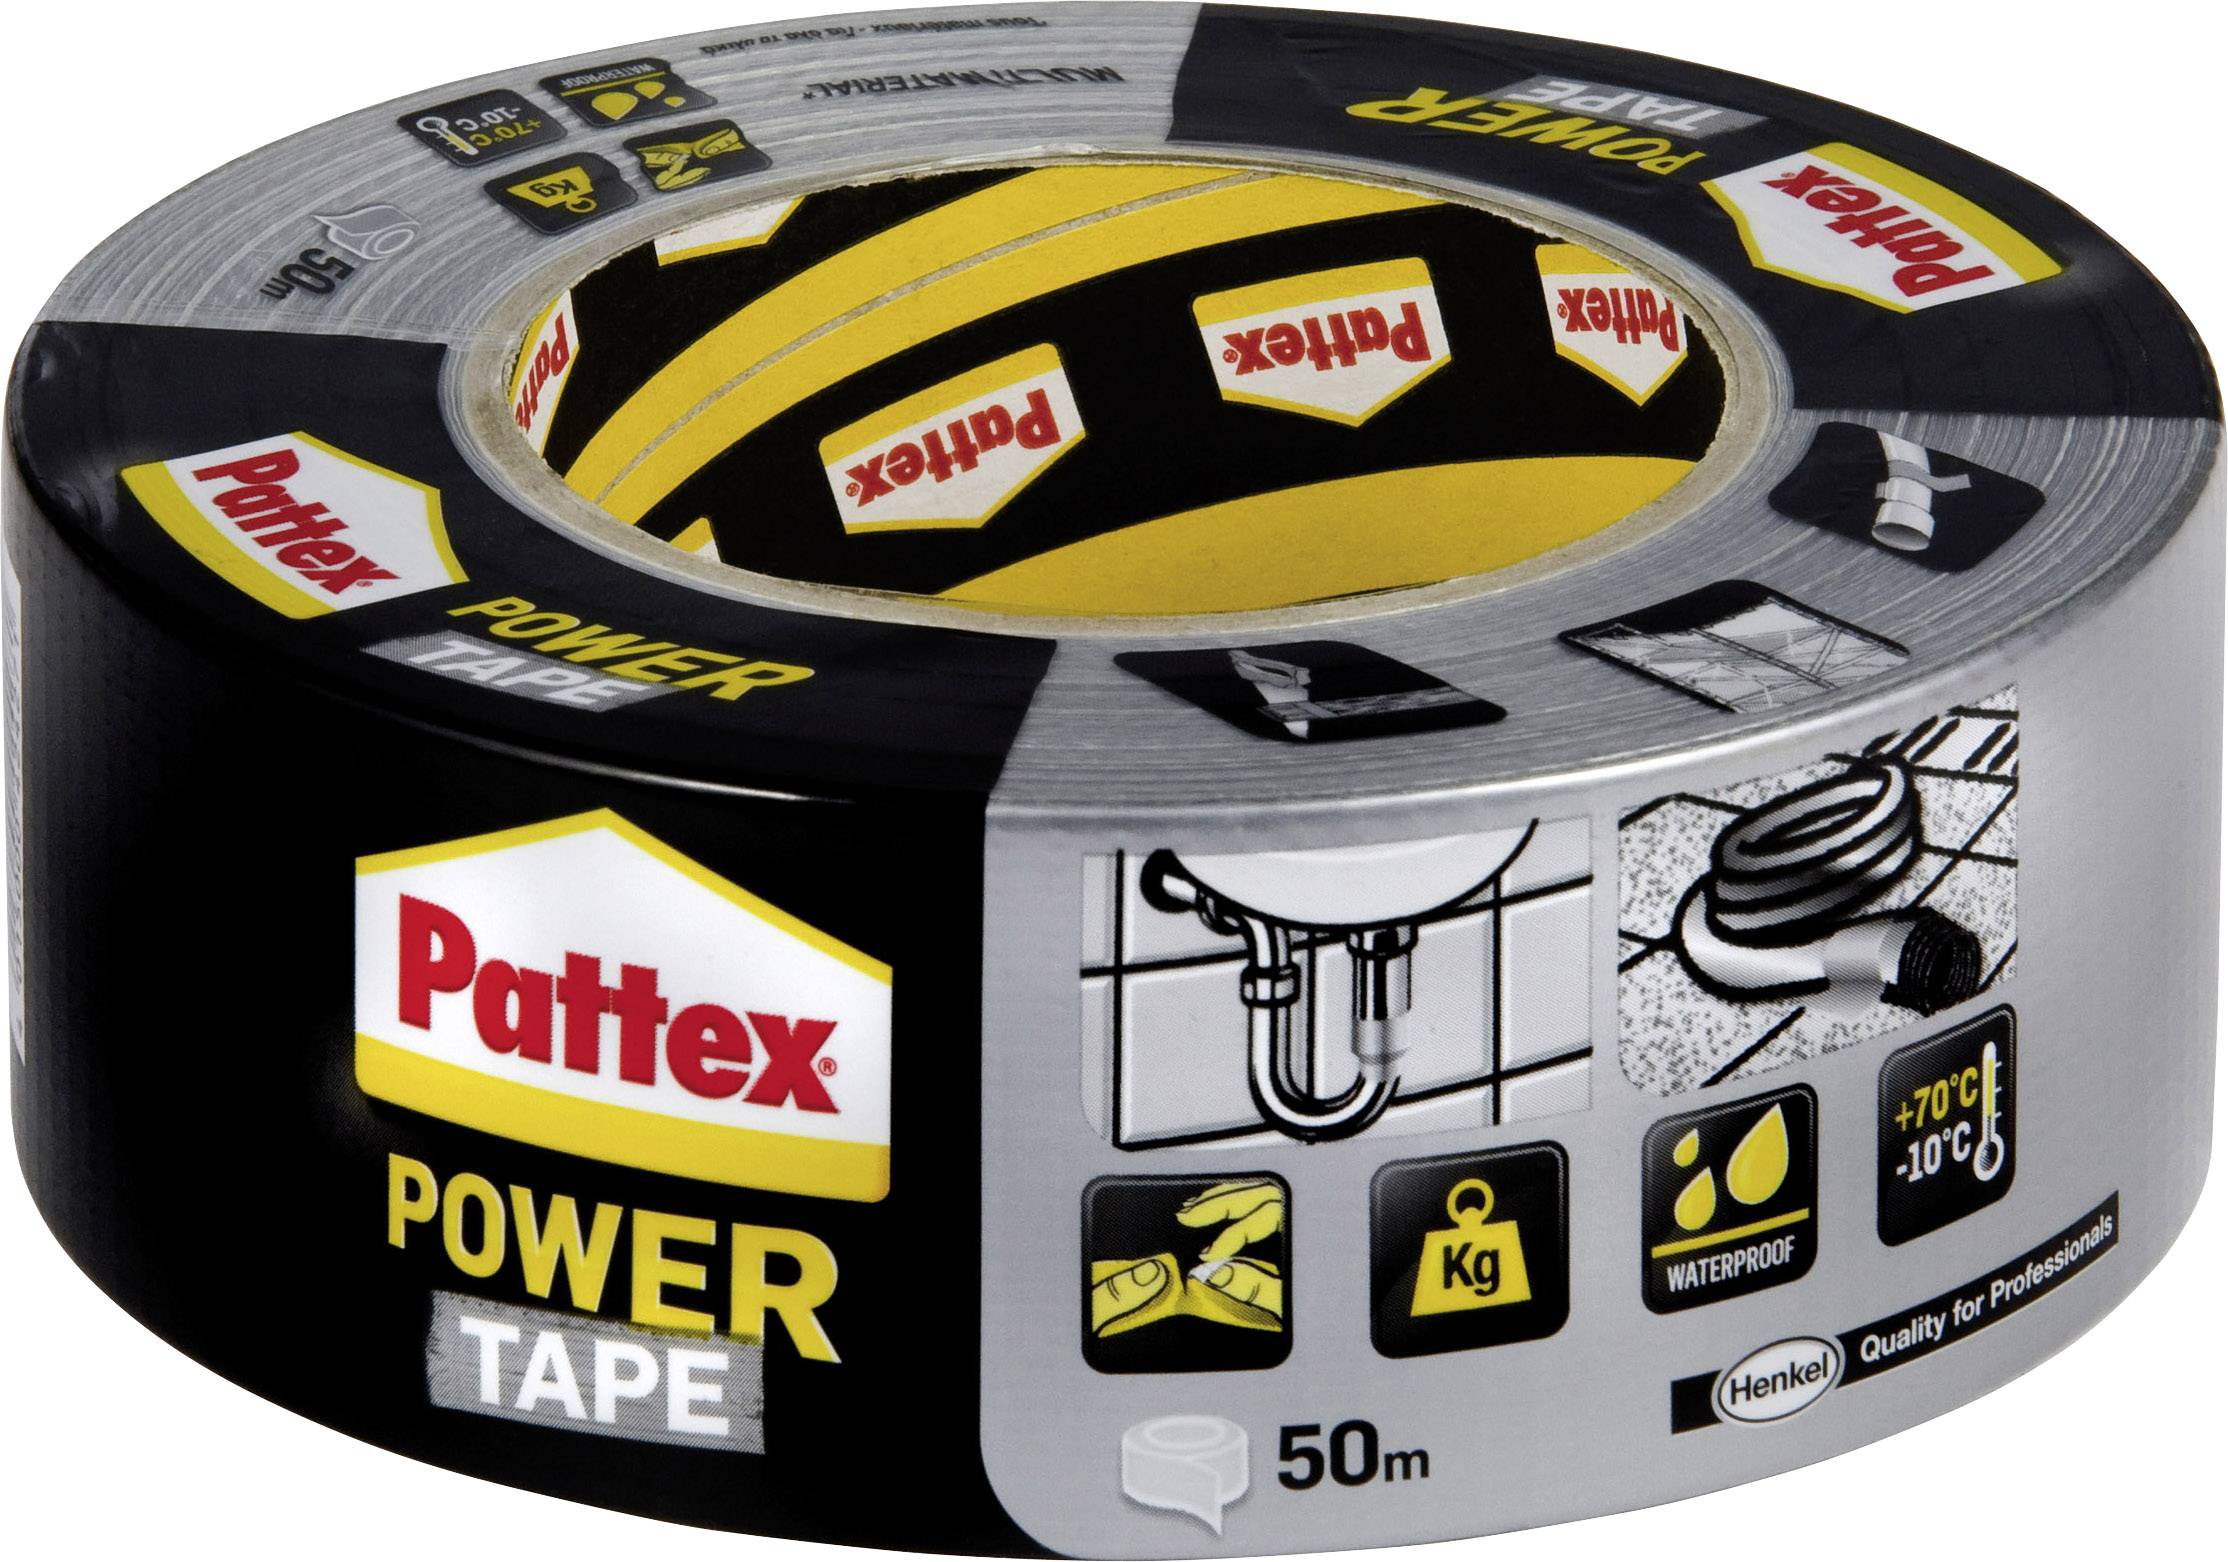 MOMENT Silver POWER TAPE Waterproof Ultra Strong Duct Tape 50m 